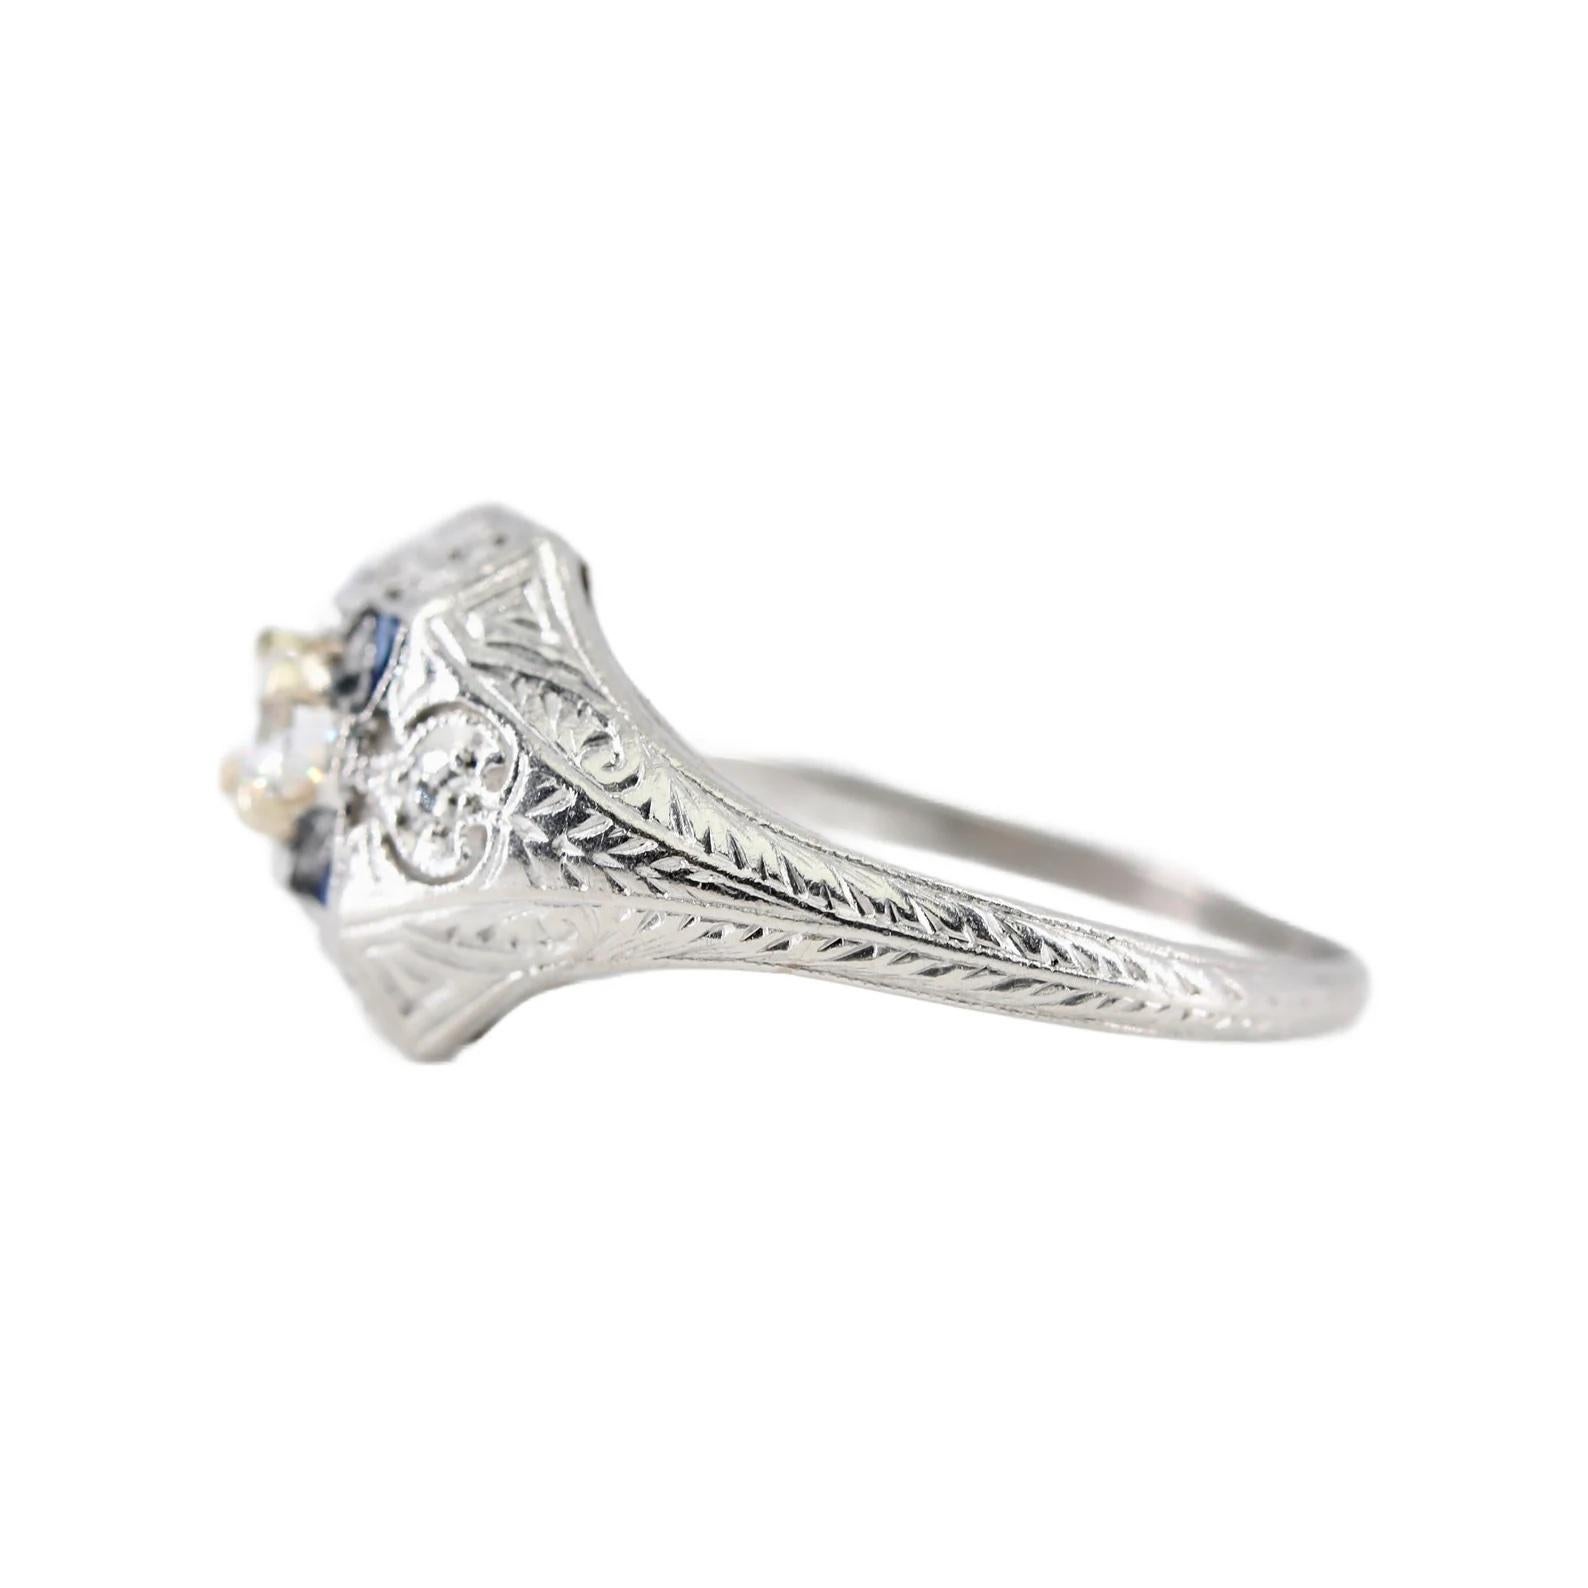 Charming Art Deco Diamond, & Sapphire Engagement Ring in Platinum Circa 1920's In Good Condition For Sale In Boston, MA